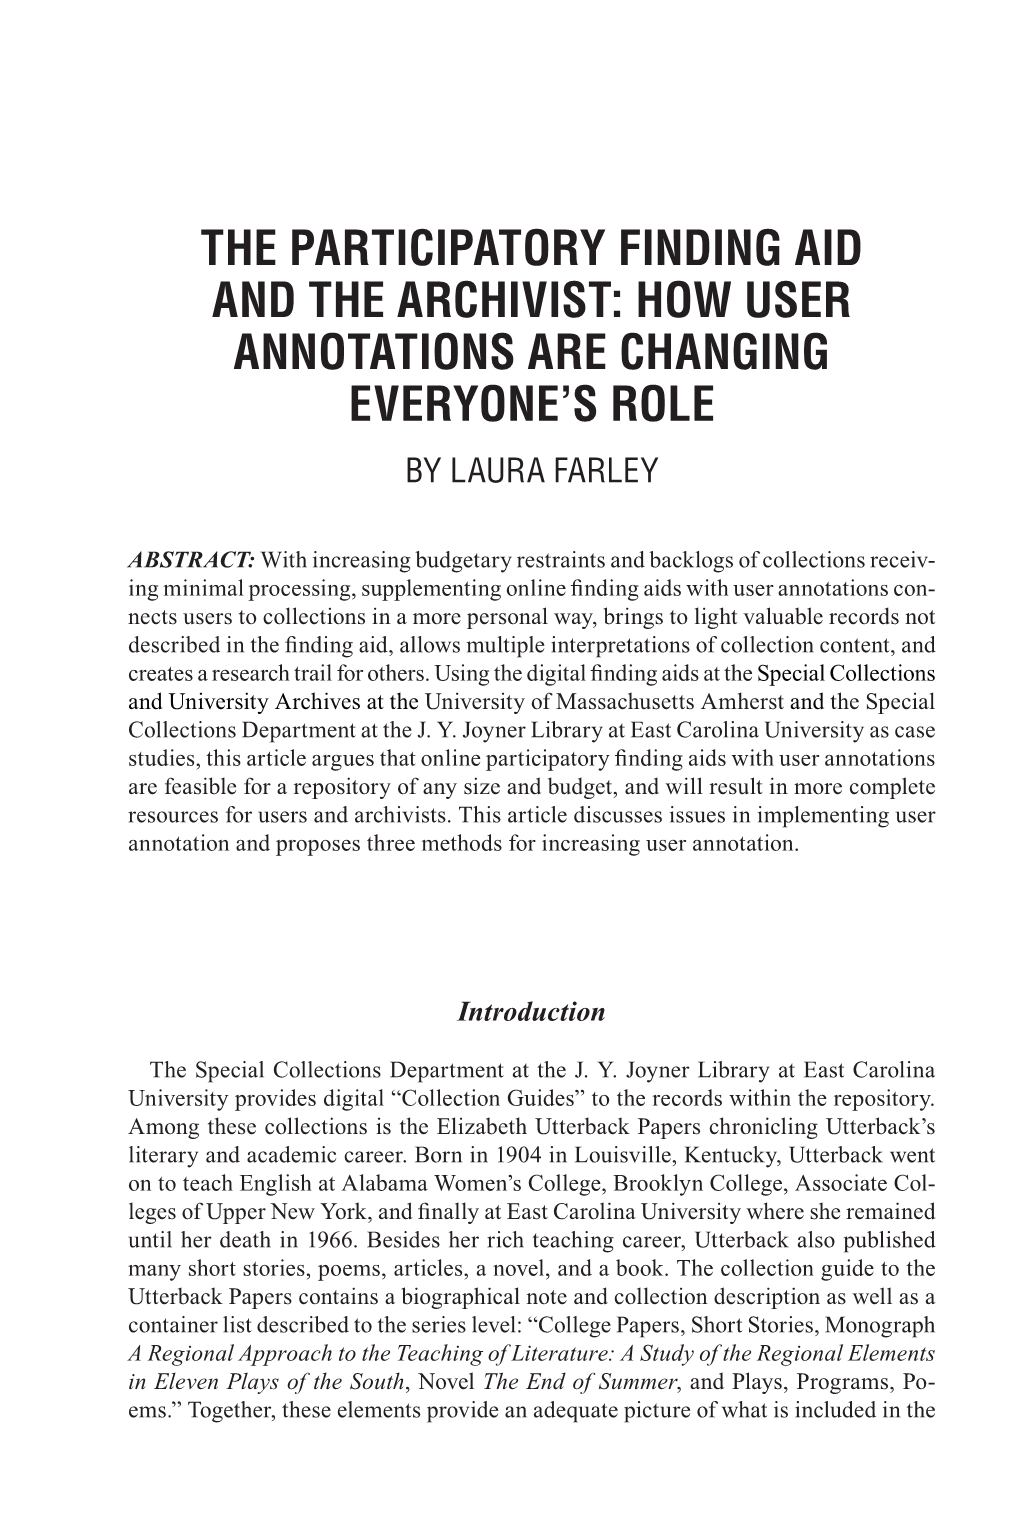 The Participatory Finding Aid and the Archivist: How User Annotations Are Changing Everyone’S Role by Laura Farley